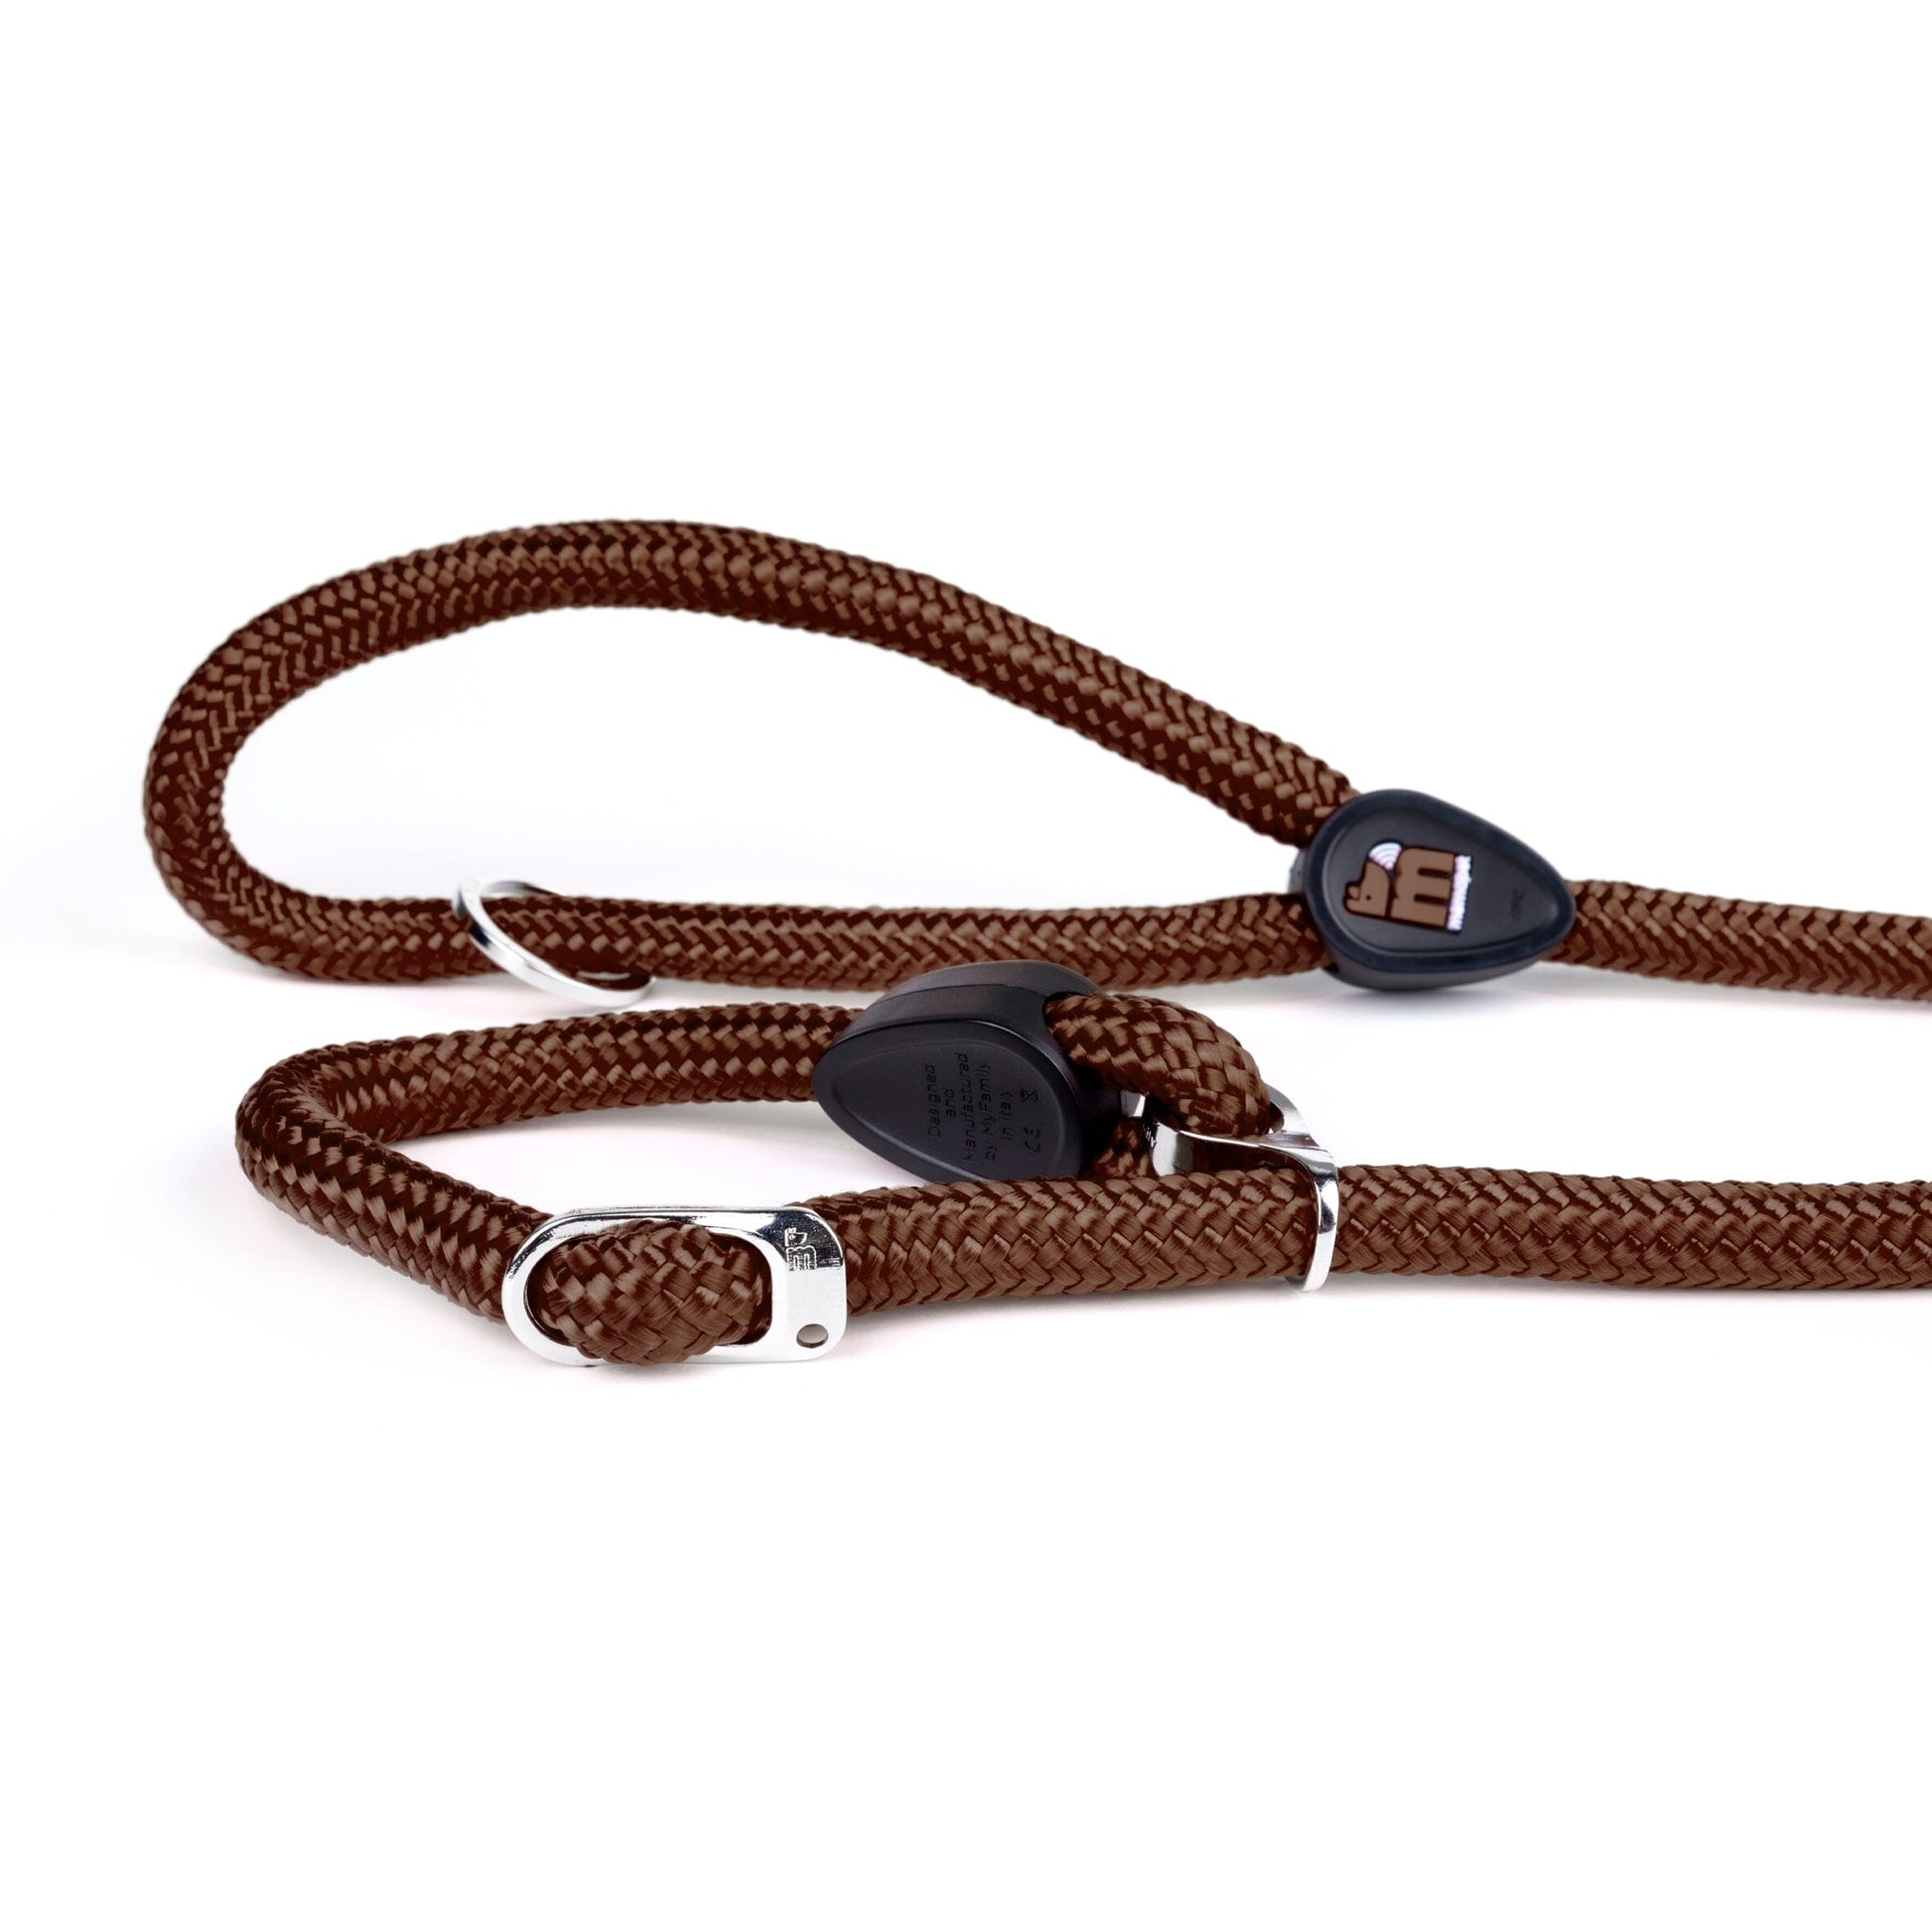 Memopet Dog Training Collar and Rope Leash 2in1 With Activity Tracking Device and Digital ID Pet Supplies My Family Medium Brown 